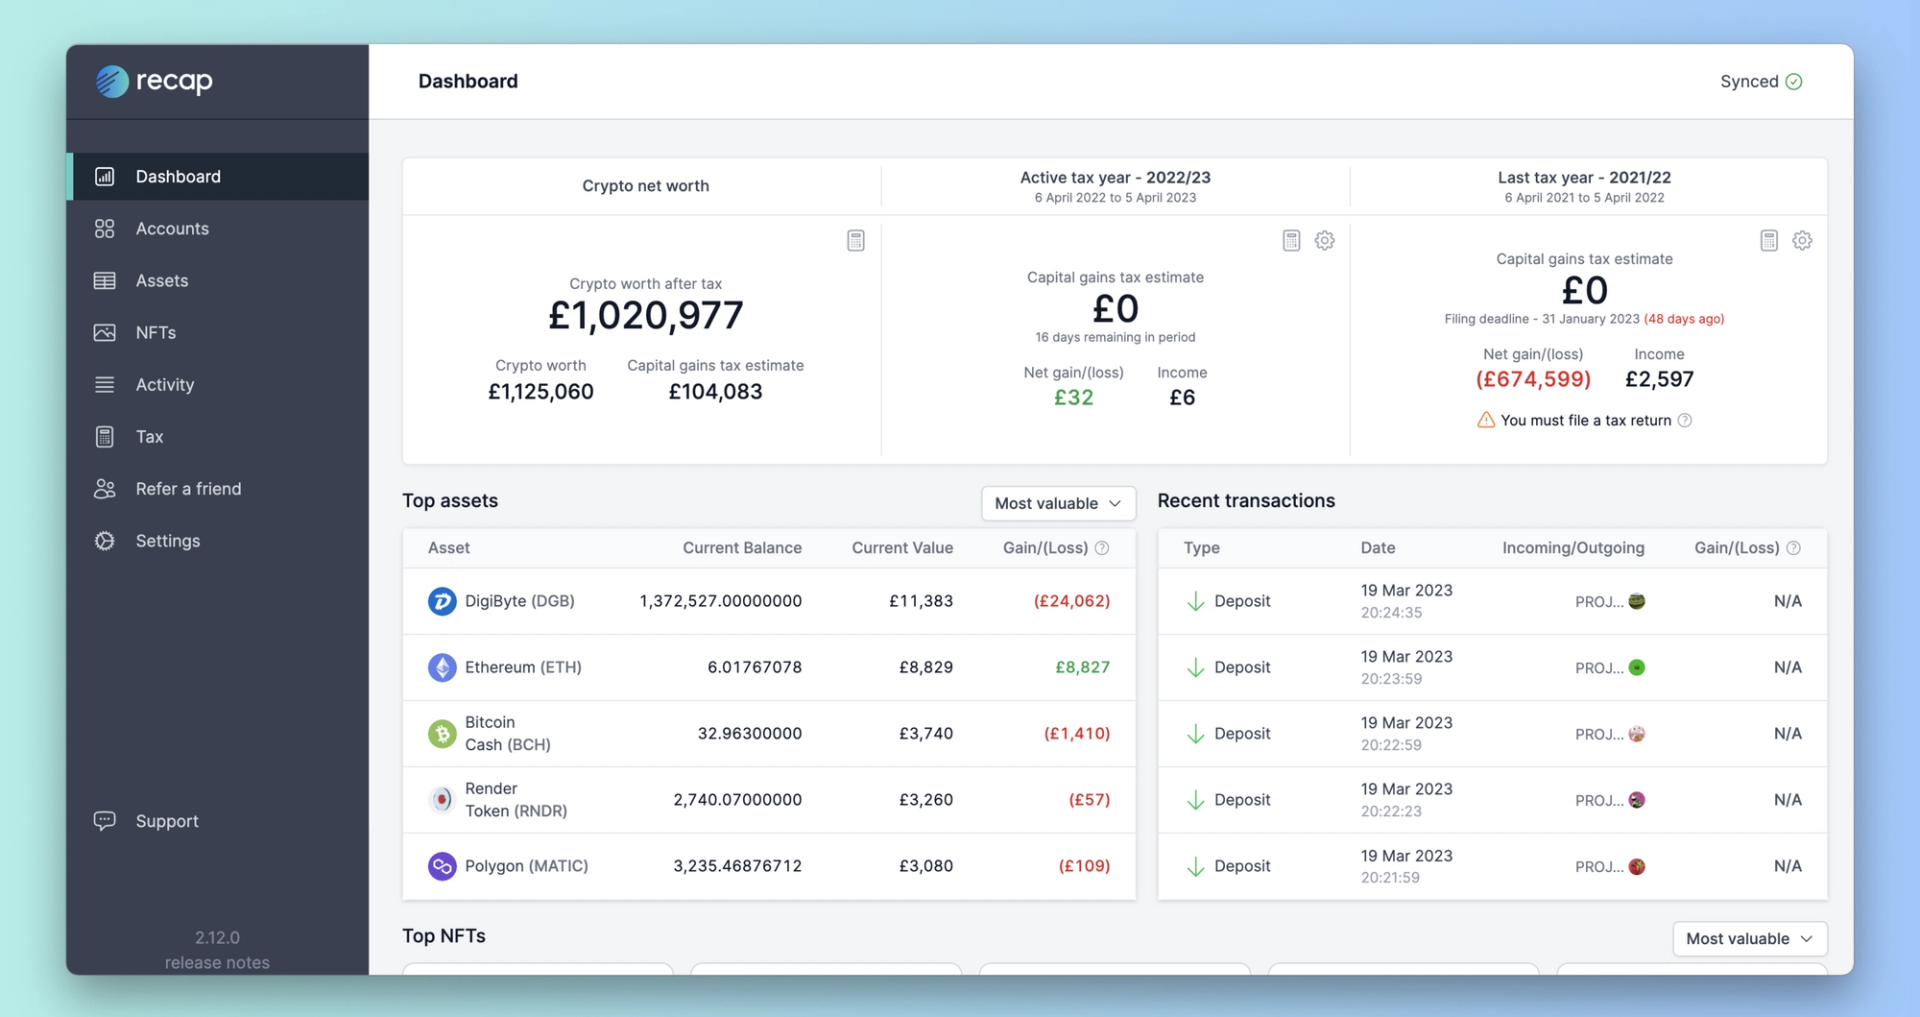 A screenshot of Recap's dashboard for UK individuals showing the top and lowest performing assets